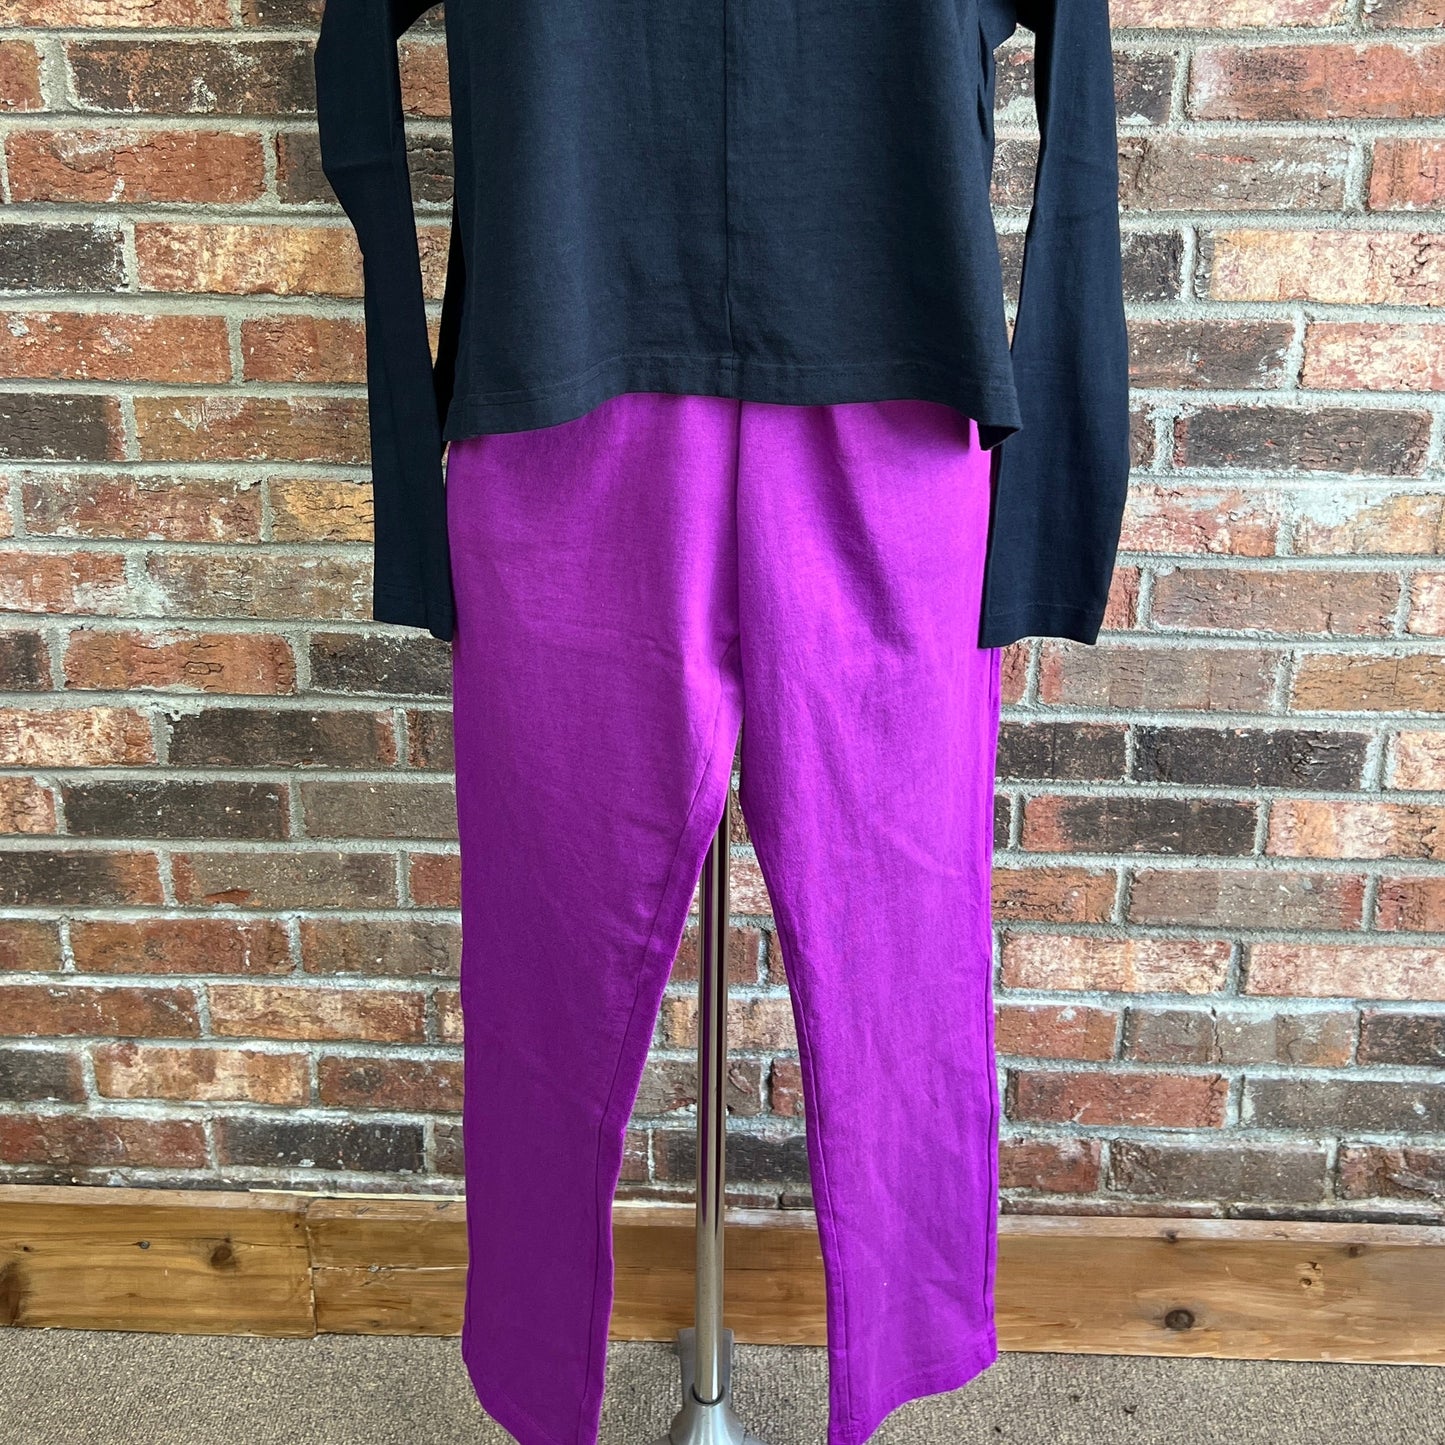 Pacificotton Sunday Pant at Victoria Susan Wearable Art